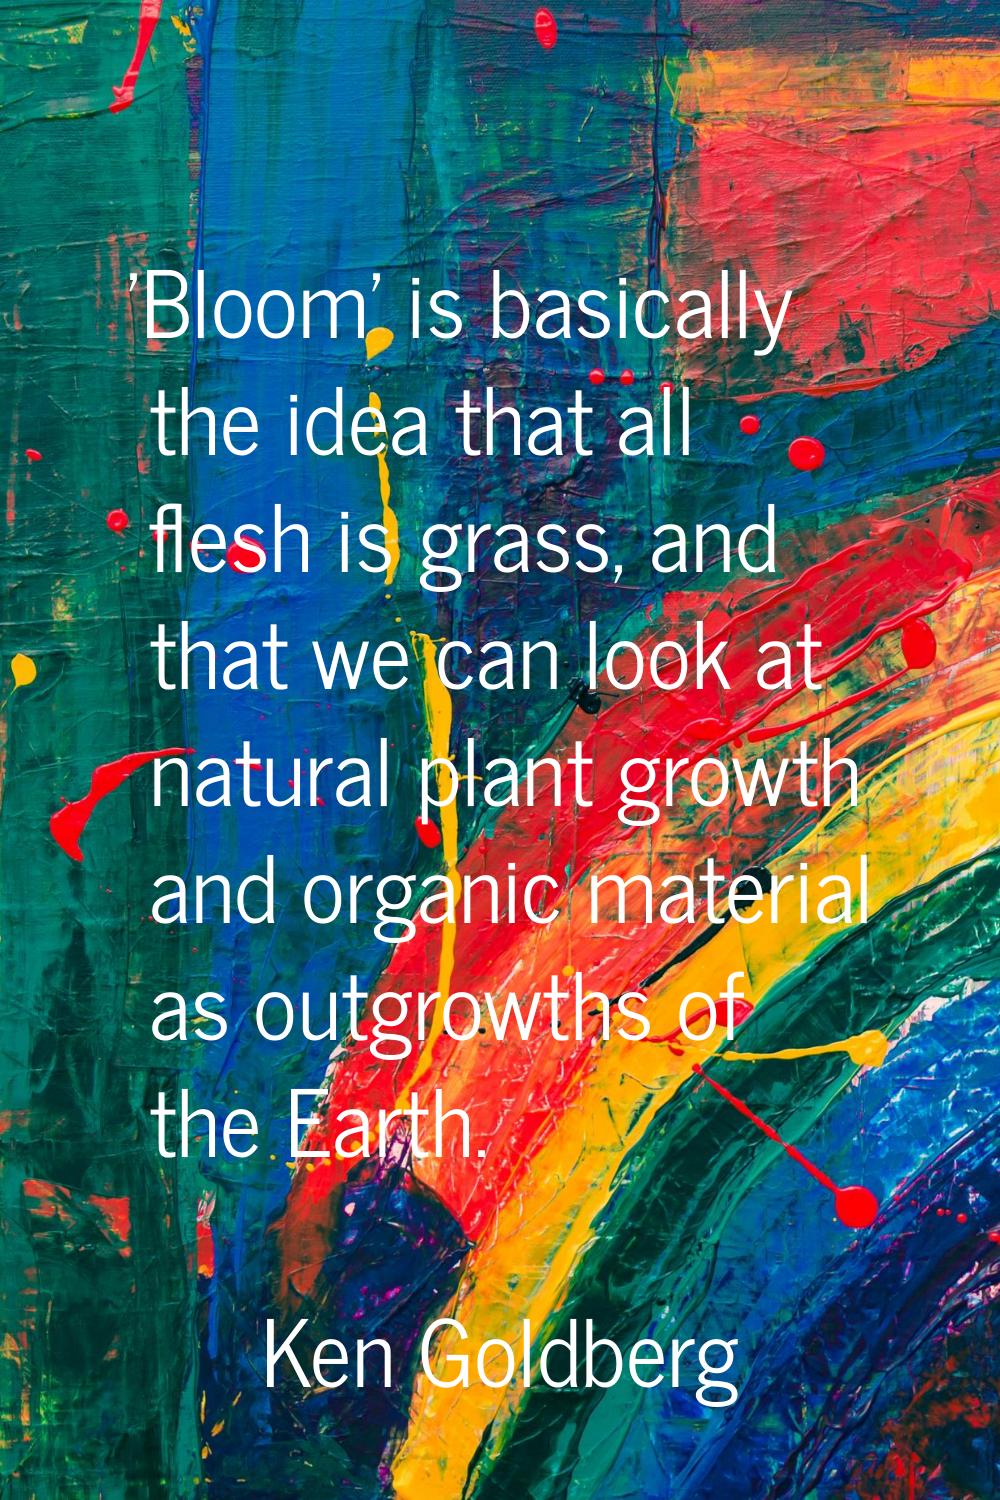 'Bloom' is basically the idea that all flesh is grass, and that we can look at natural plant growth